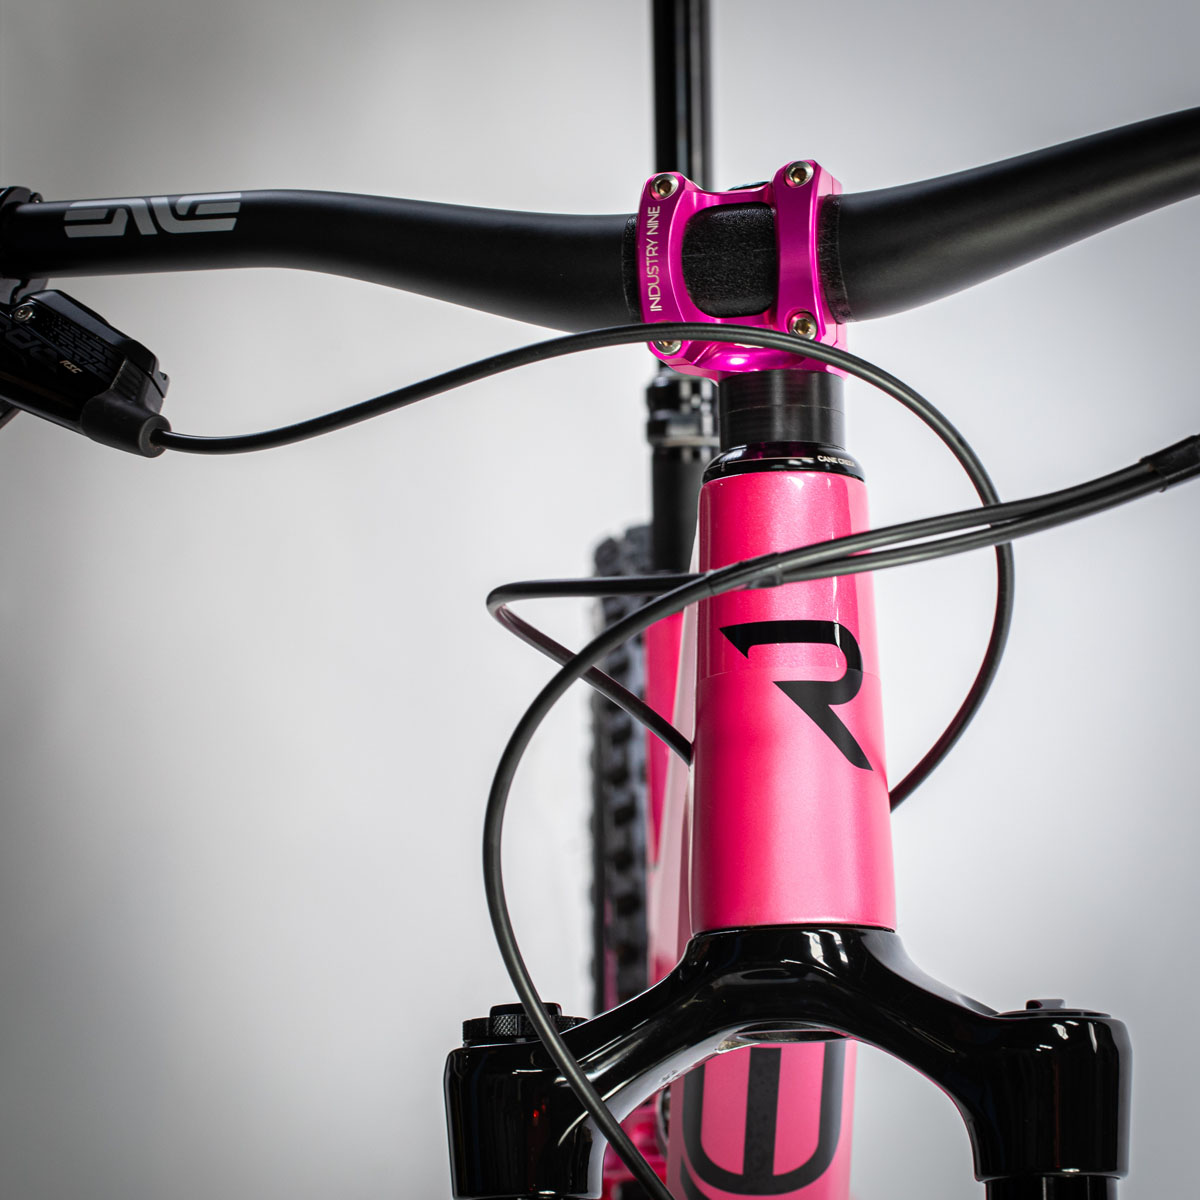 Win a Pink Rail! Revel Bikes x LoveYourBrain fundraiser to support TBI foundation